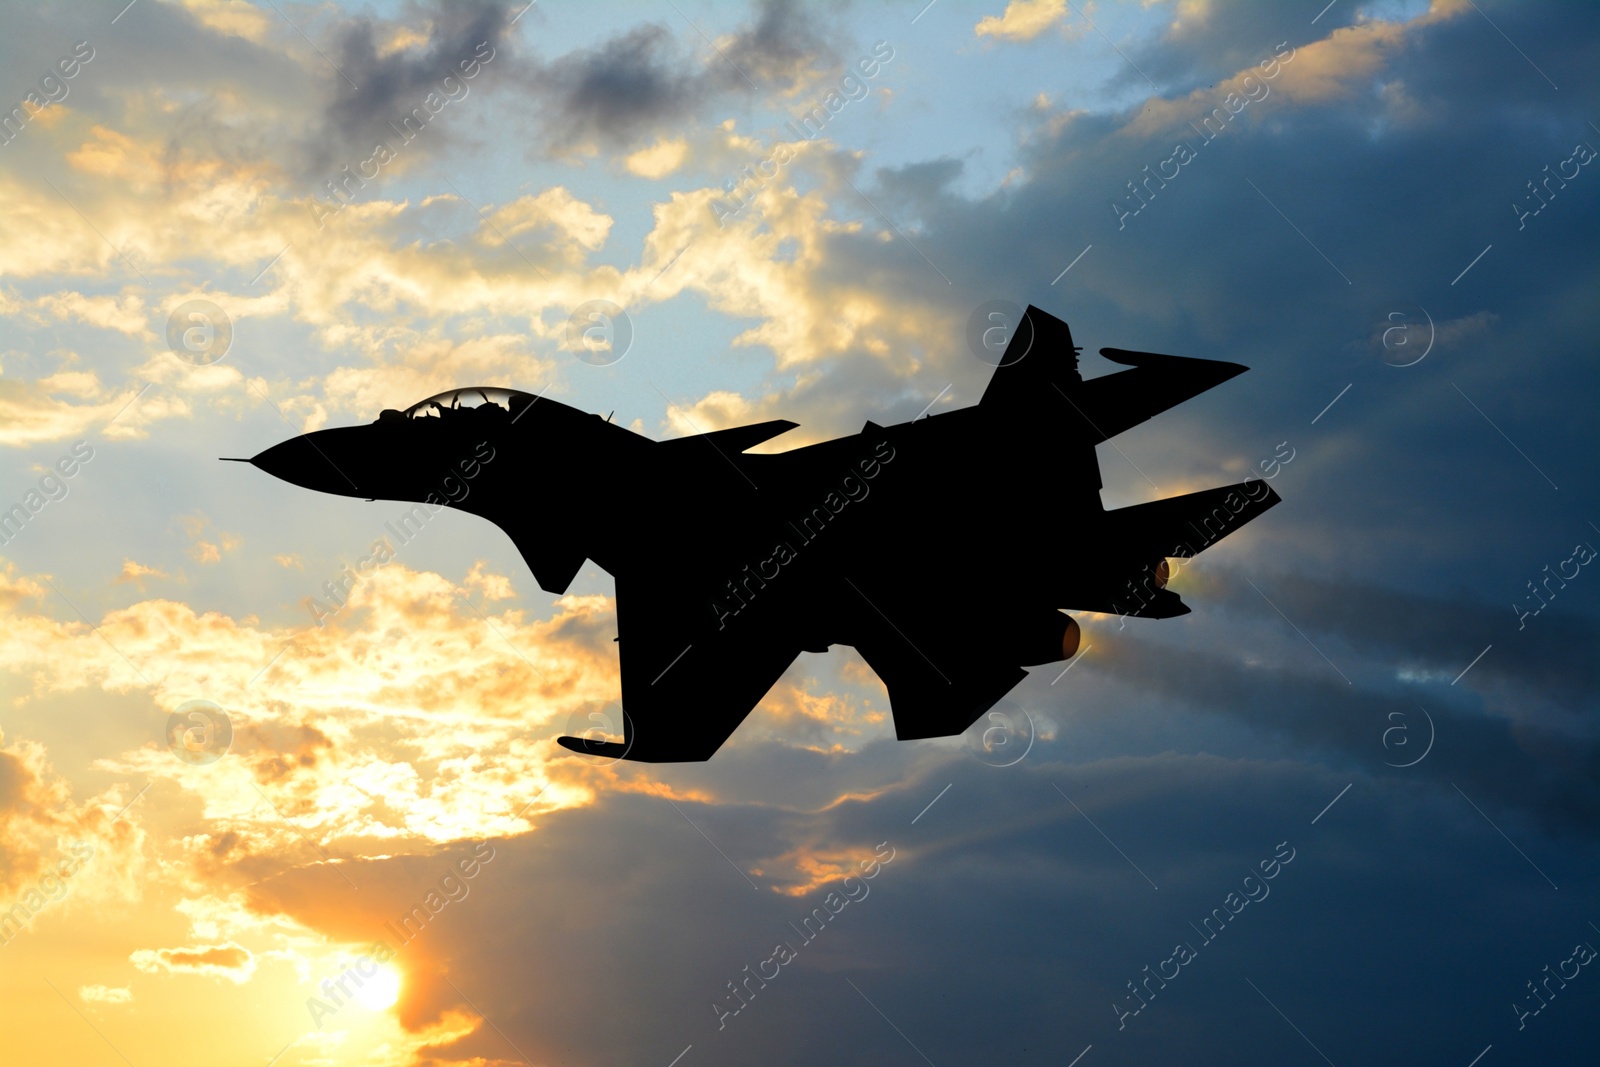 Image of Silhouette of jet fighter in cloudy sky at sunrise